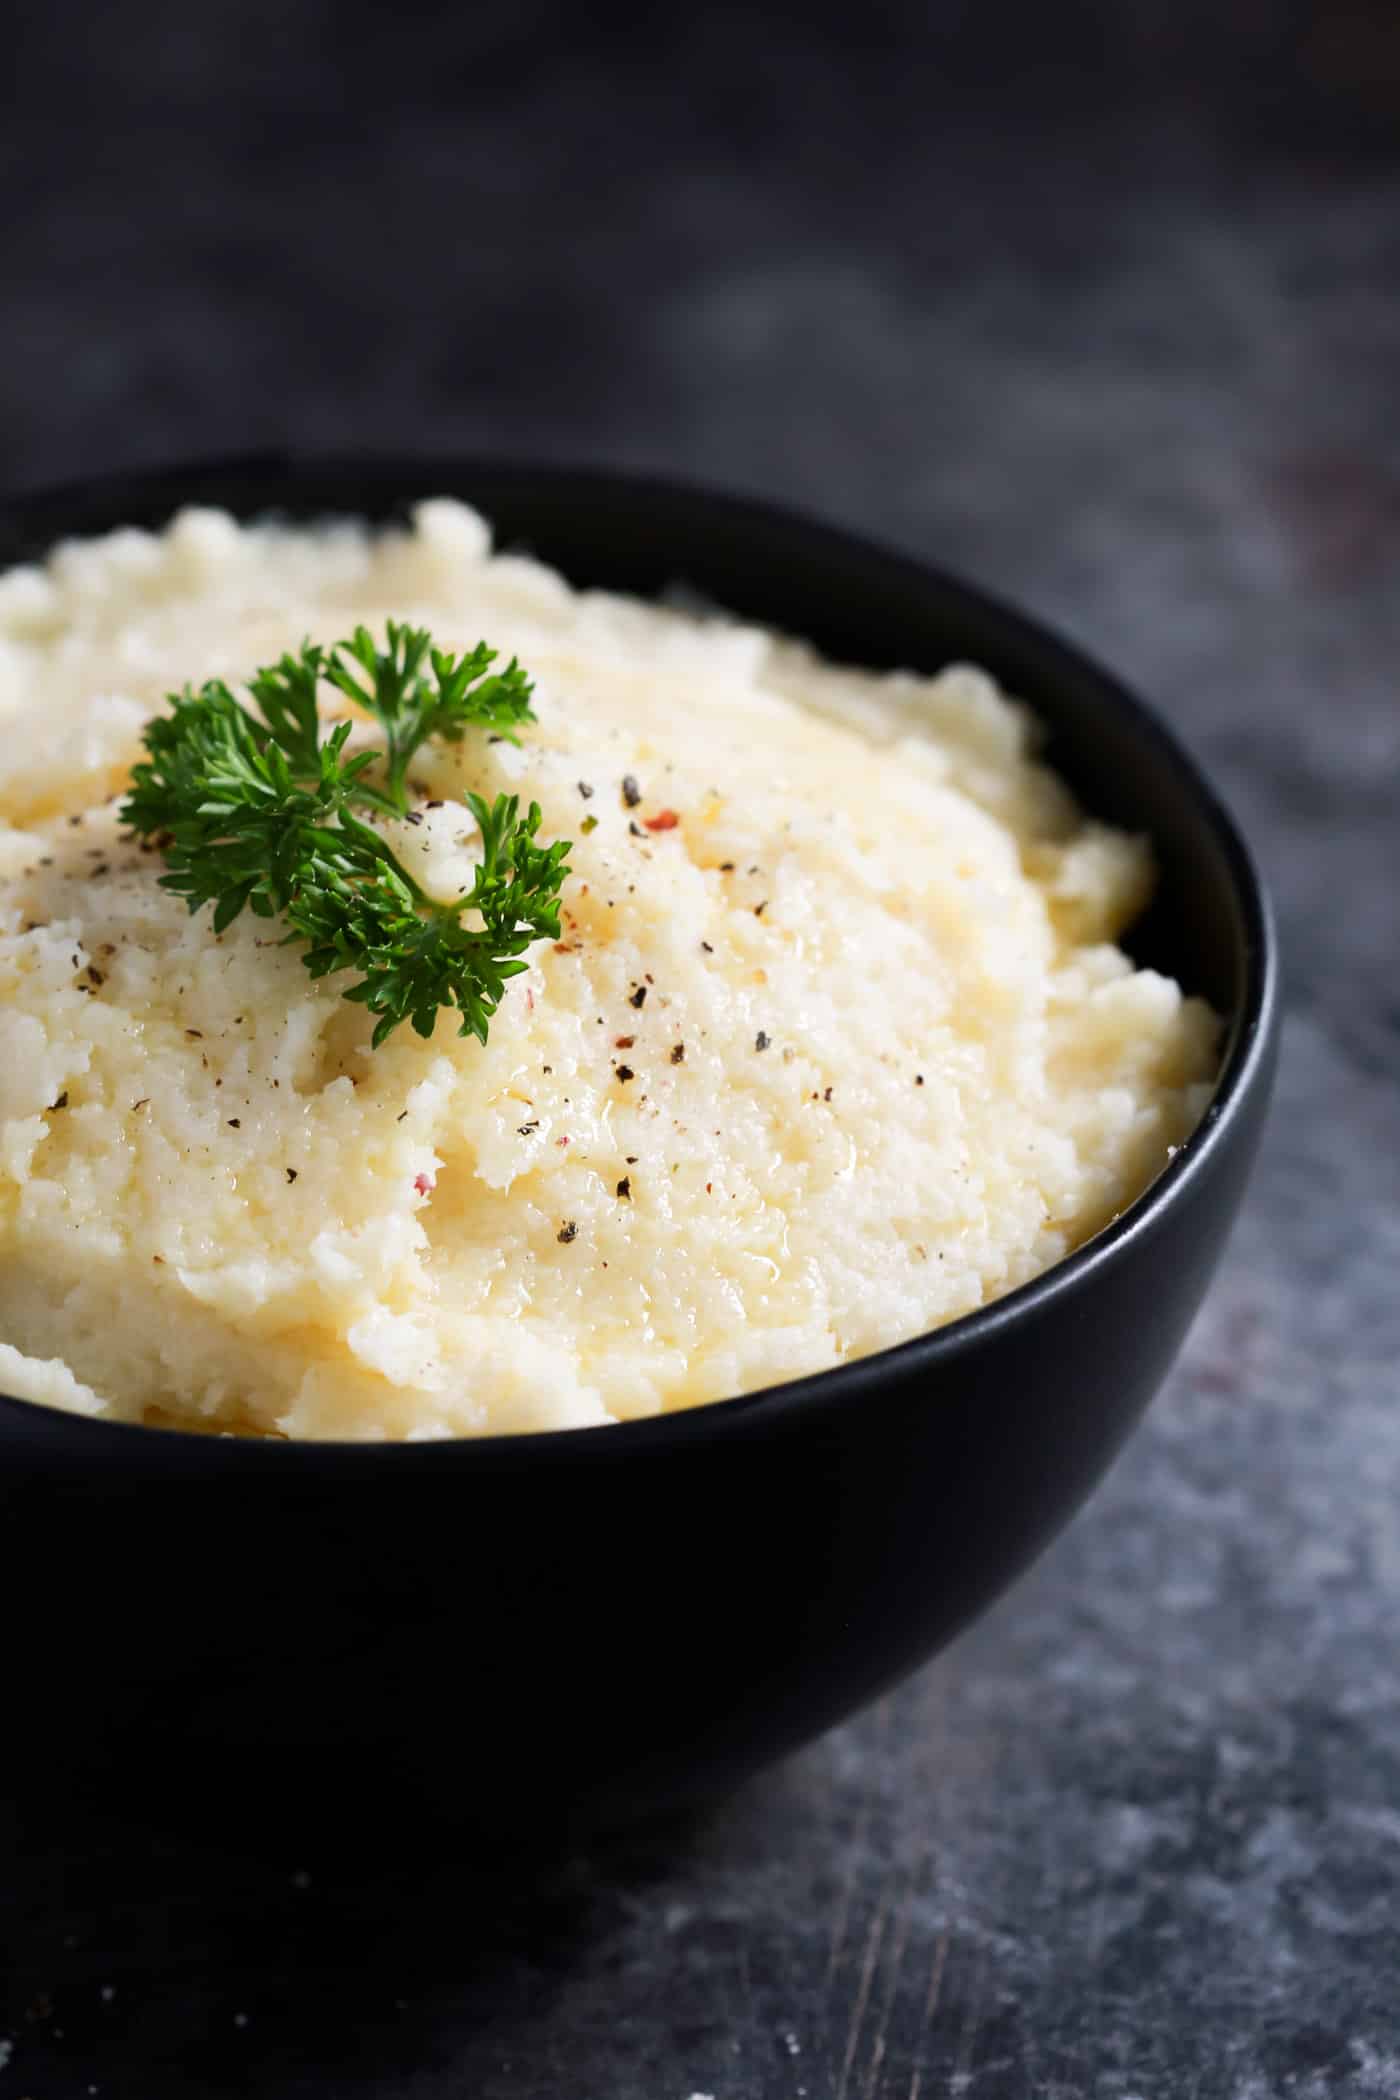  Tired of making watery mashed cauliflower? Try to make my perfect mashed cauliflower recipe using an immersion blender and season with garlic powder, Parmesan cheese, mayo and butter. Mm… Amazing! It has a perfect smooth texture that you and your family will love.